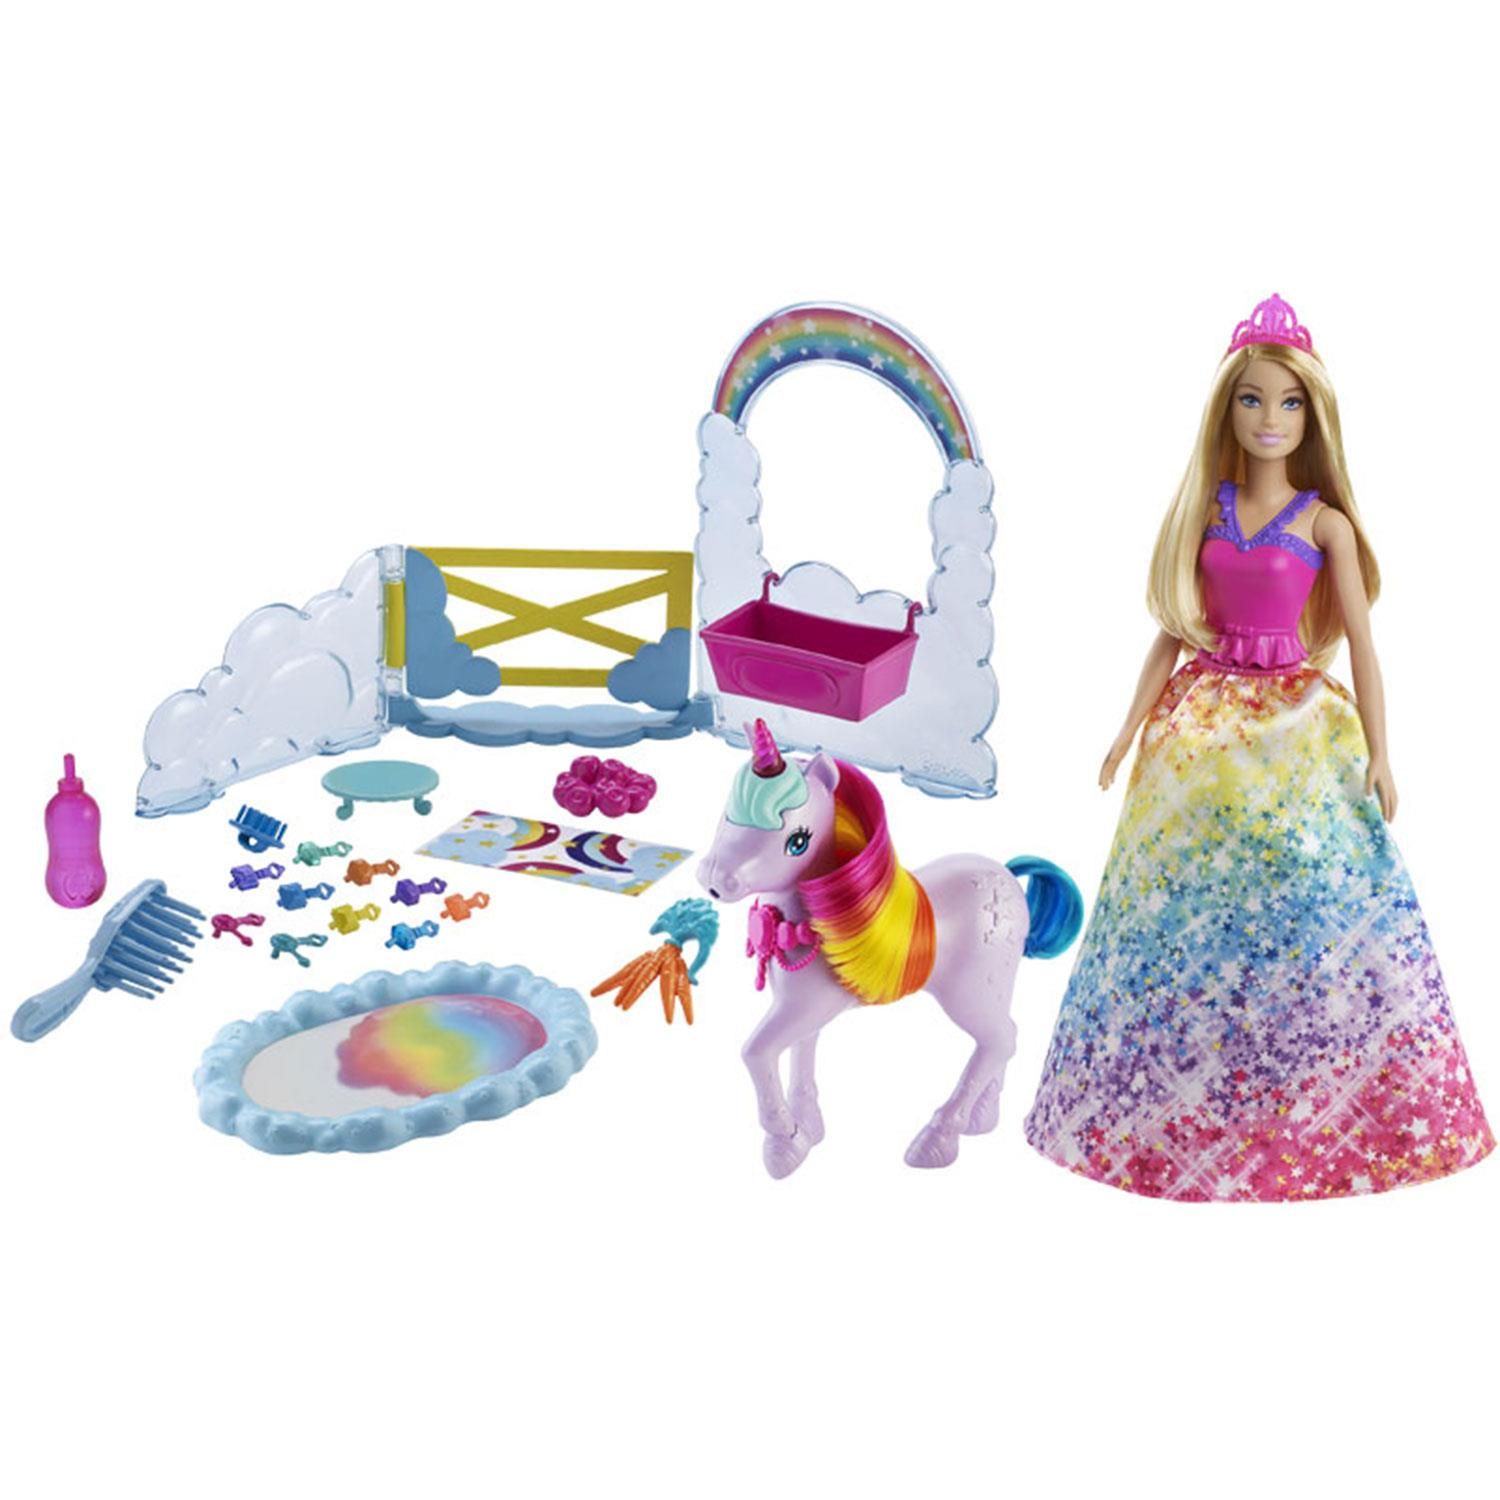 Barbie Dreamtopia Unicorn Pet Playset with Princess Doll

This Barbie Dreamtopia playset inspires kids to create all kinds of nurturing fairytale adventures! The Barbie princess doll can take care of her pet unicorn toy. Fill the bottle with water and help the Barbie doll feed her unicorn friend. The potty pad will change colour from white to a beautiful rainbow! This Barbie playset comes with a toy unicorn trough, snacks, hairbrushes (for Barbie princess and her unicorn) and 10 doll accessories for many imaginative play possibilities. Makes an excellent gift for kids aged 3+.

Features:

With a magical Colour change feature and so many accessories
This Barbie princess doll and unicorn playset makes the perfect gift
Doll cannot stand alone.
Colours and decorations may vary.

Specifications:

Toy Type: Unicorn Doll Play Set
Material: Abs Plastic
Colour: Multicolour
Age Range: 3 Years & Above

Box Contains:

1x Barbie Doll
1x toy unicorn trough
1x snacks
1x hairbrushes
1x grooming brush
10x doll accessories